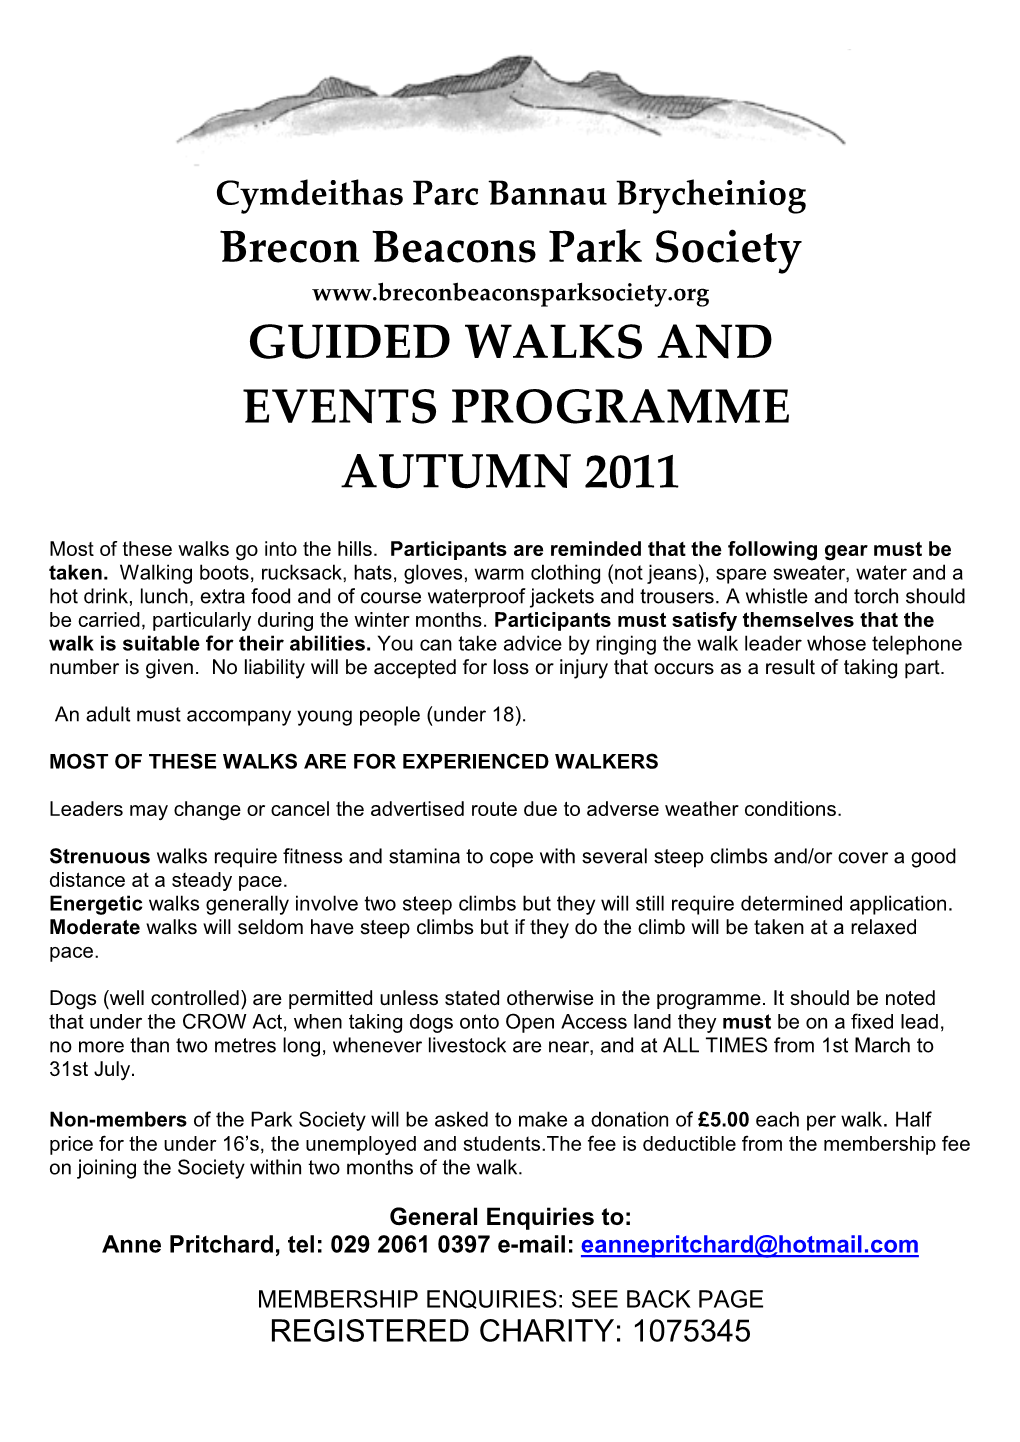 Guided Walks and Events Programme Autumn 2011